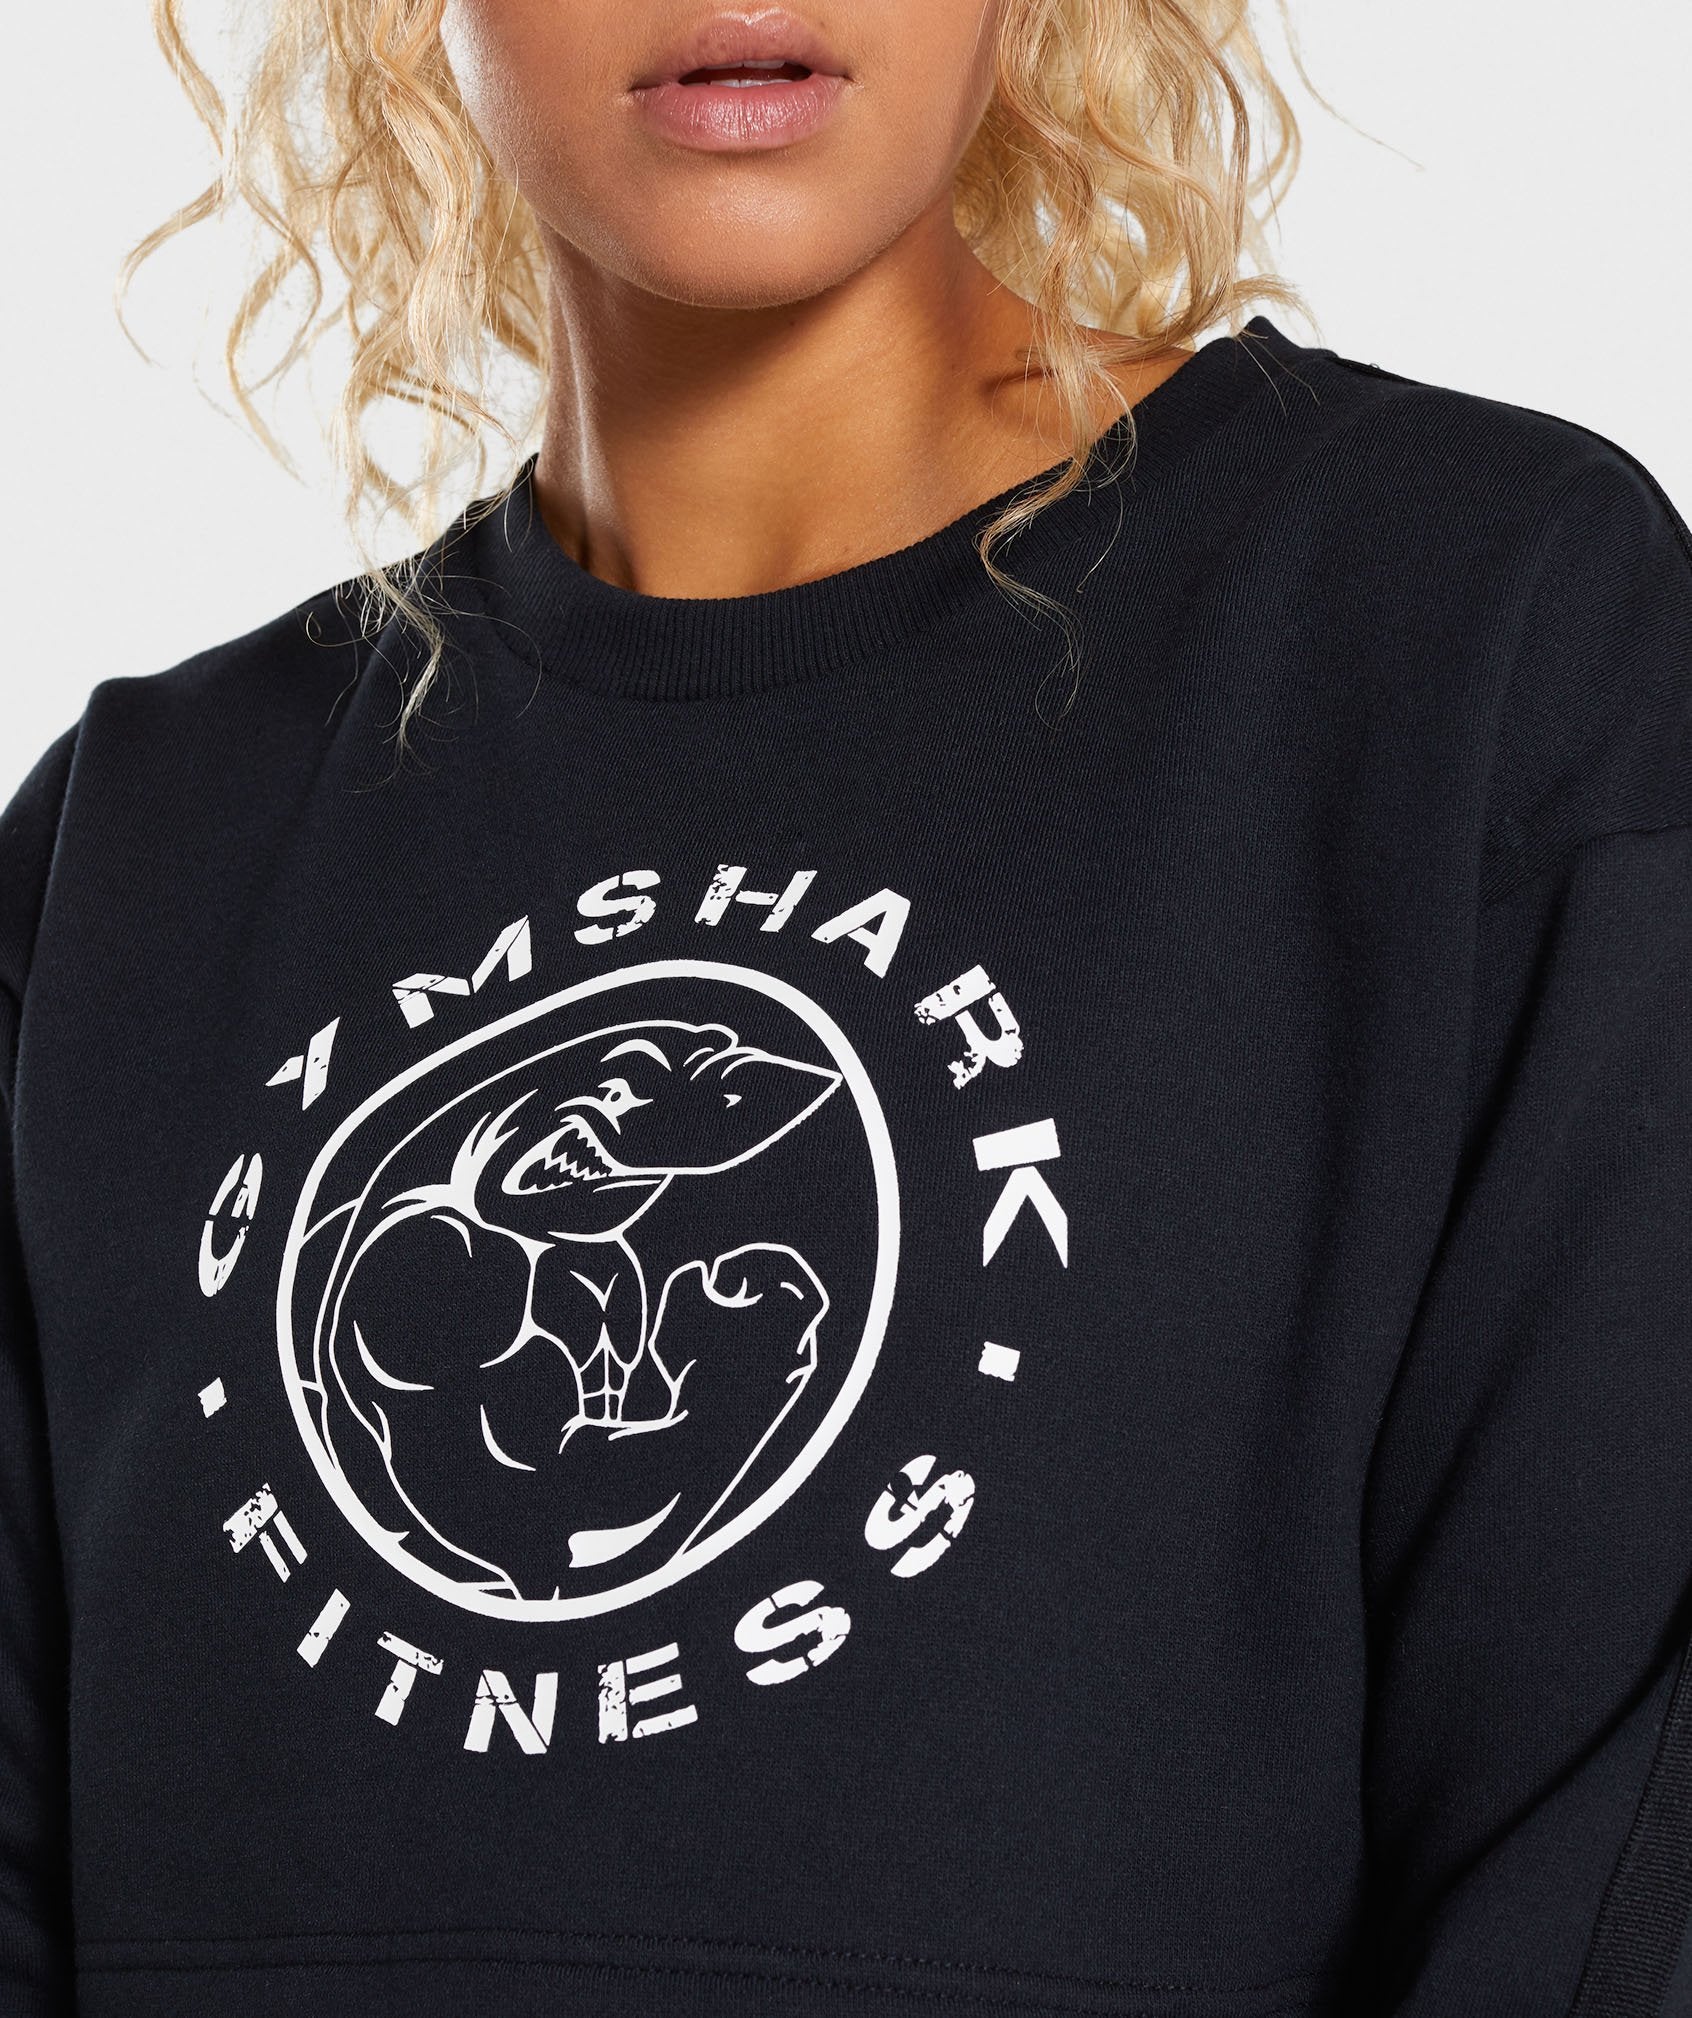 Legacy Fitness Sweater in Black - view 5